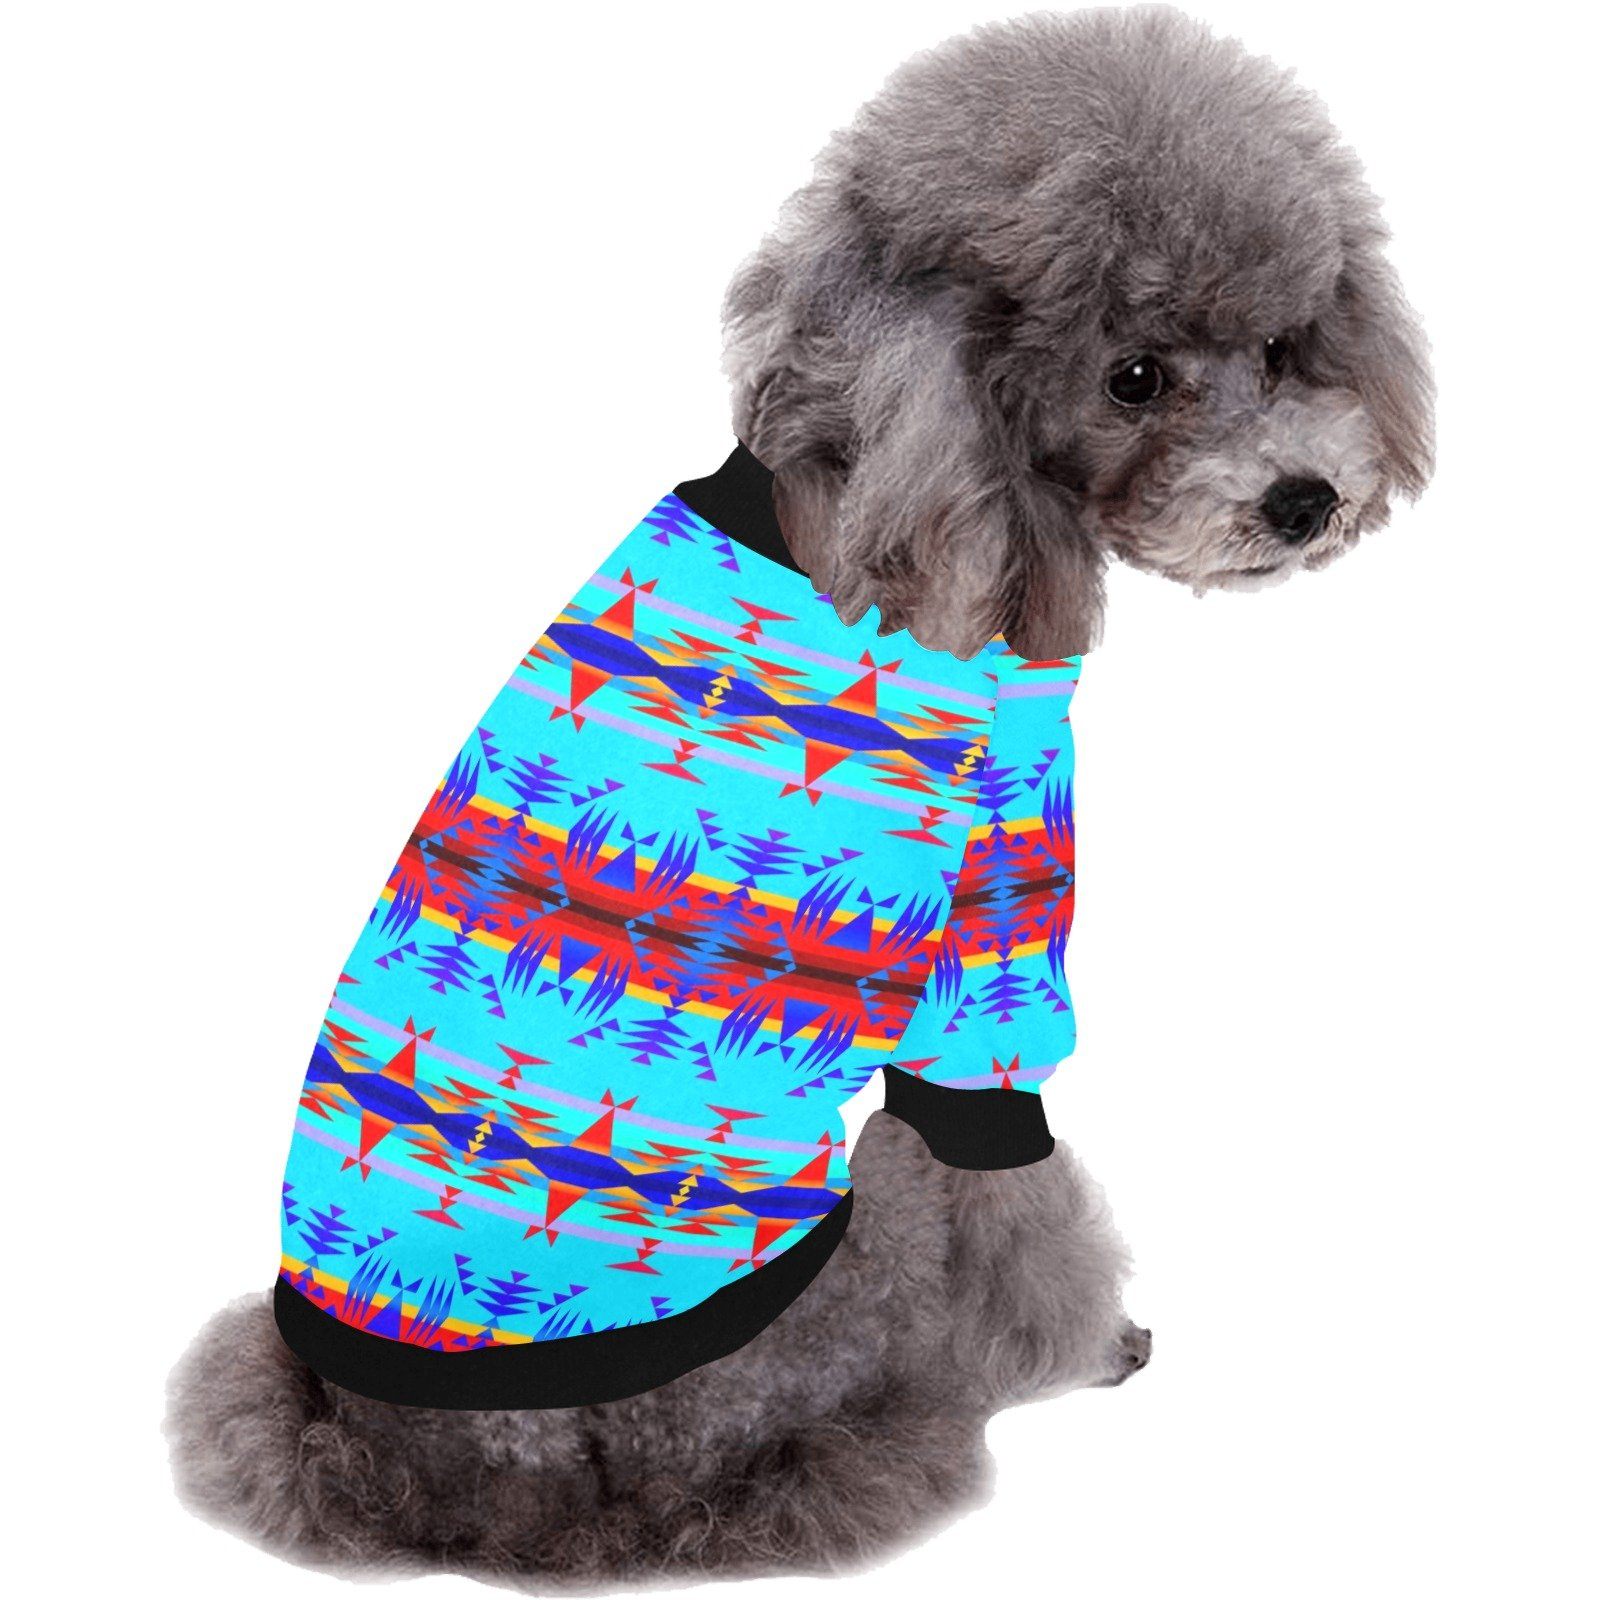 Between the Mountains Blue Pet Dog Round Neck Shirt Pet Dog Round Neck Shirt e-joyer 